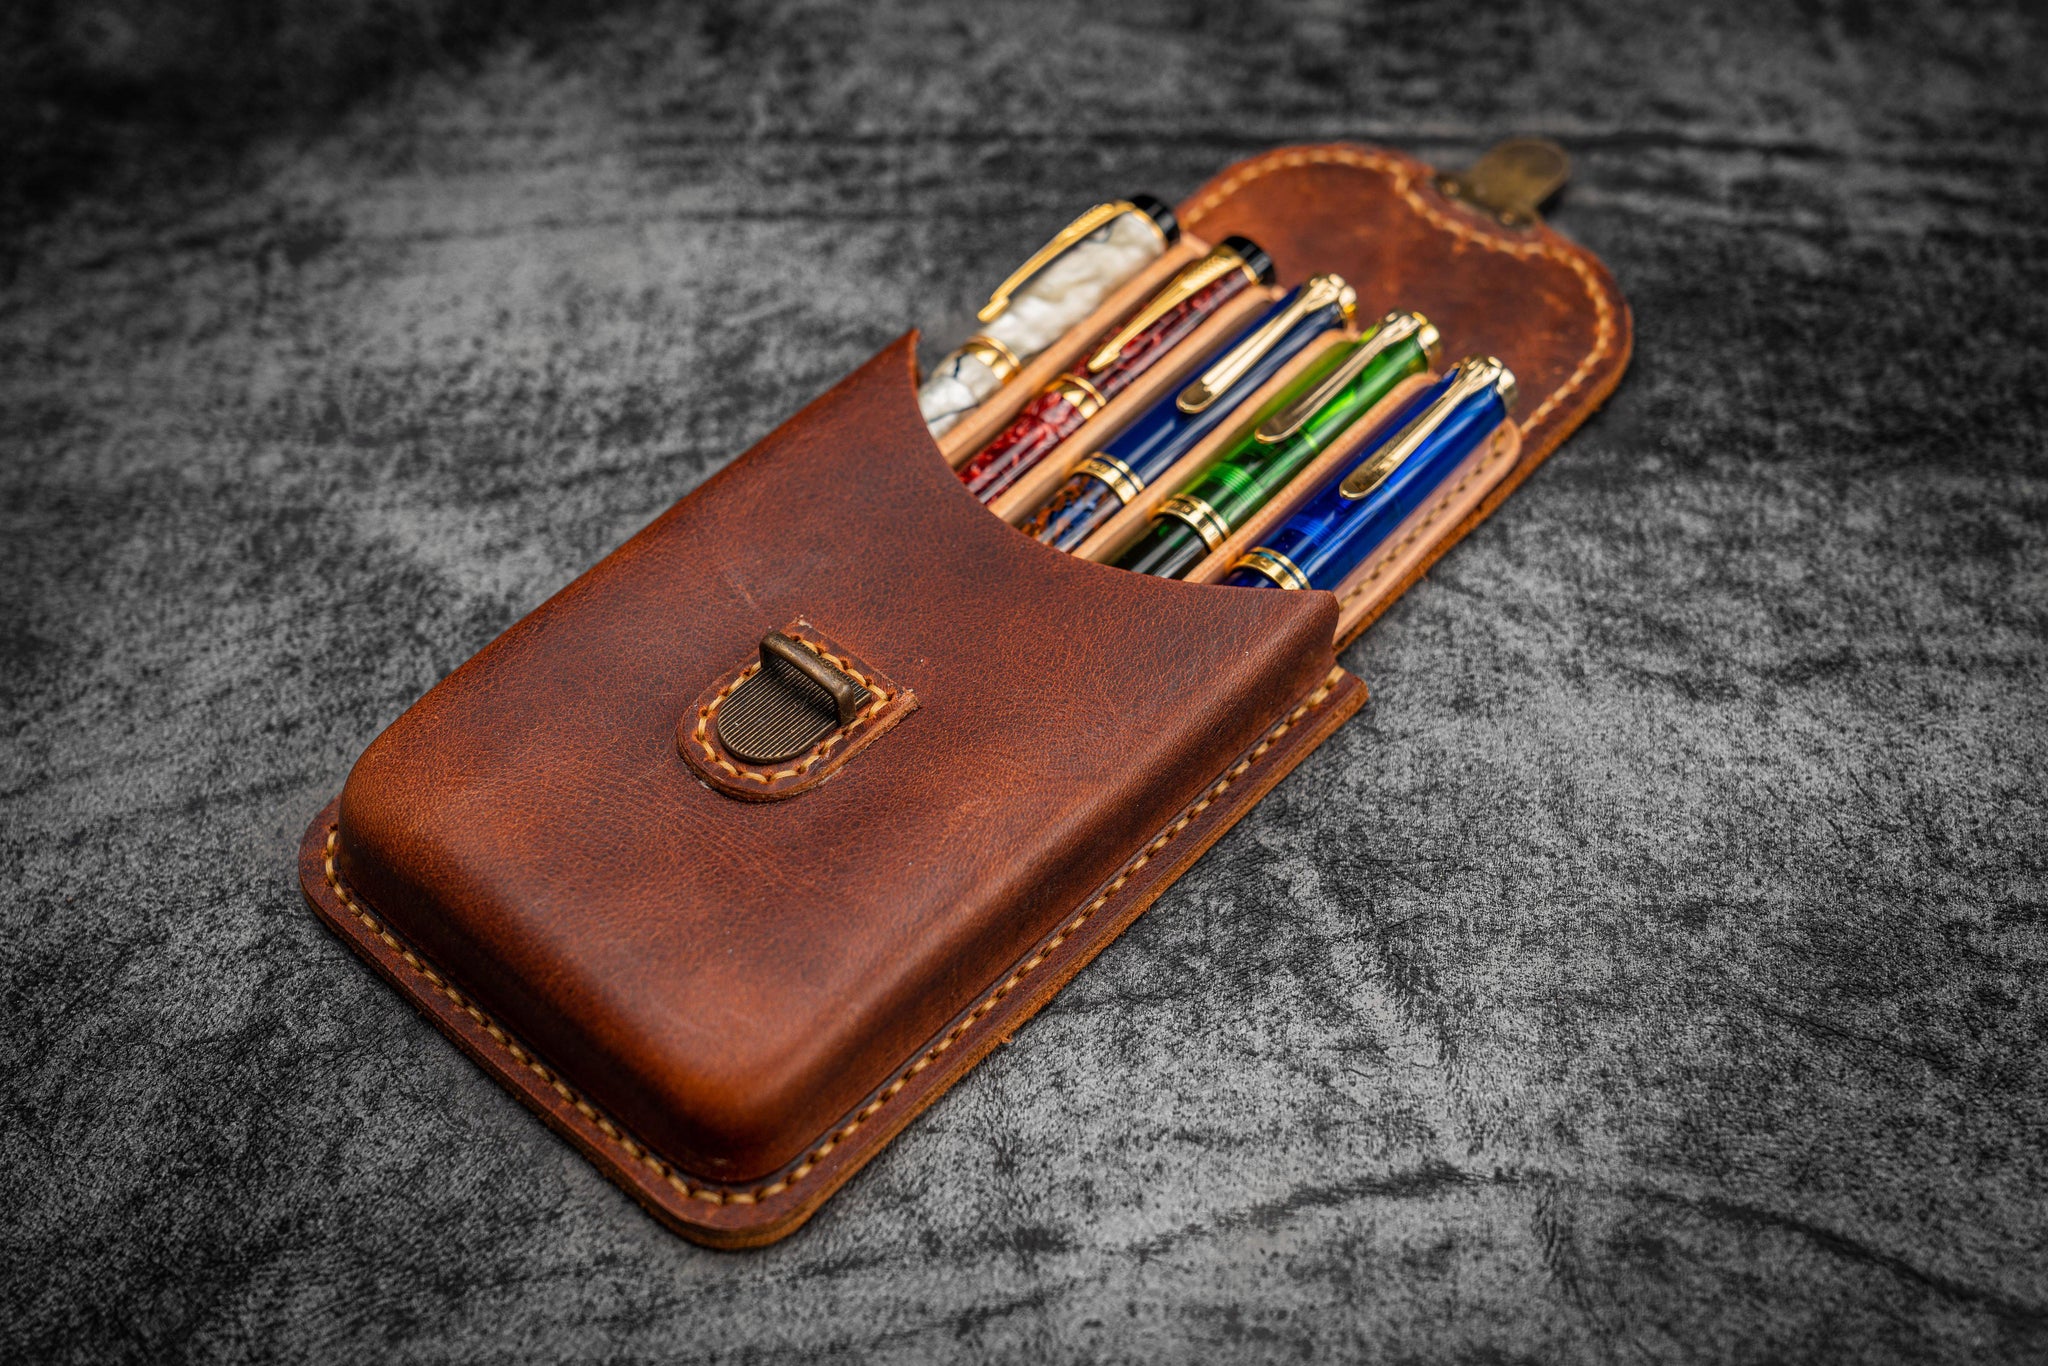 Leather Pencil Holder For Student, Genuine Pen Case, School Staff